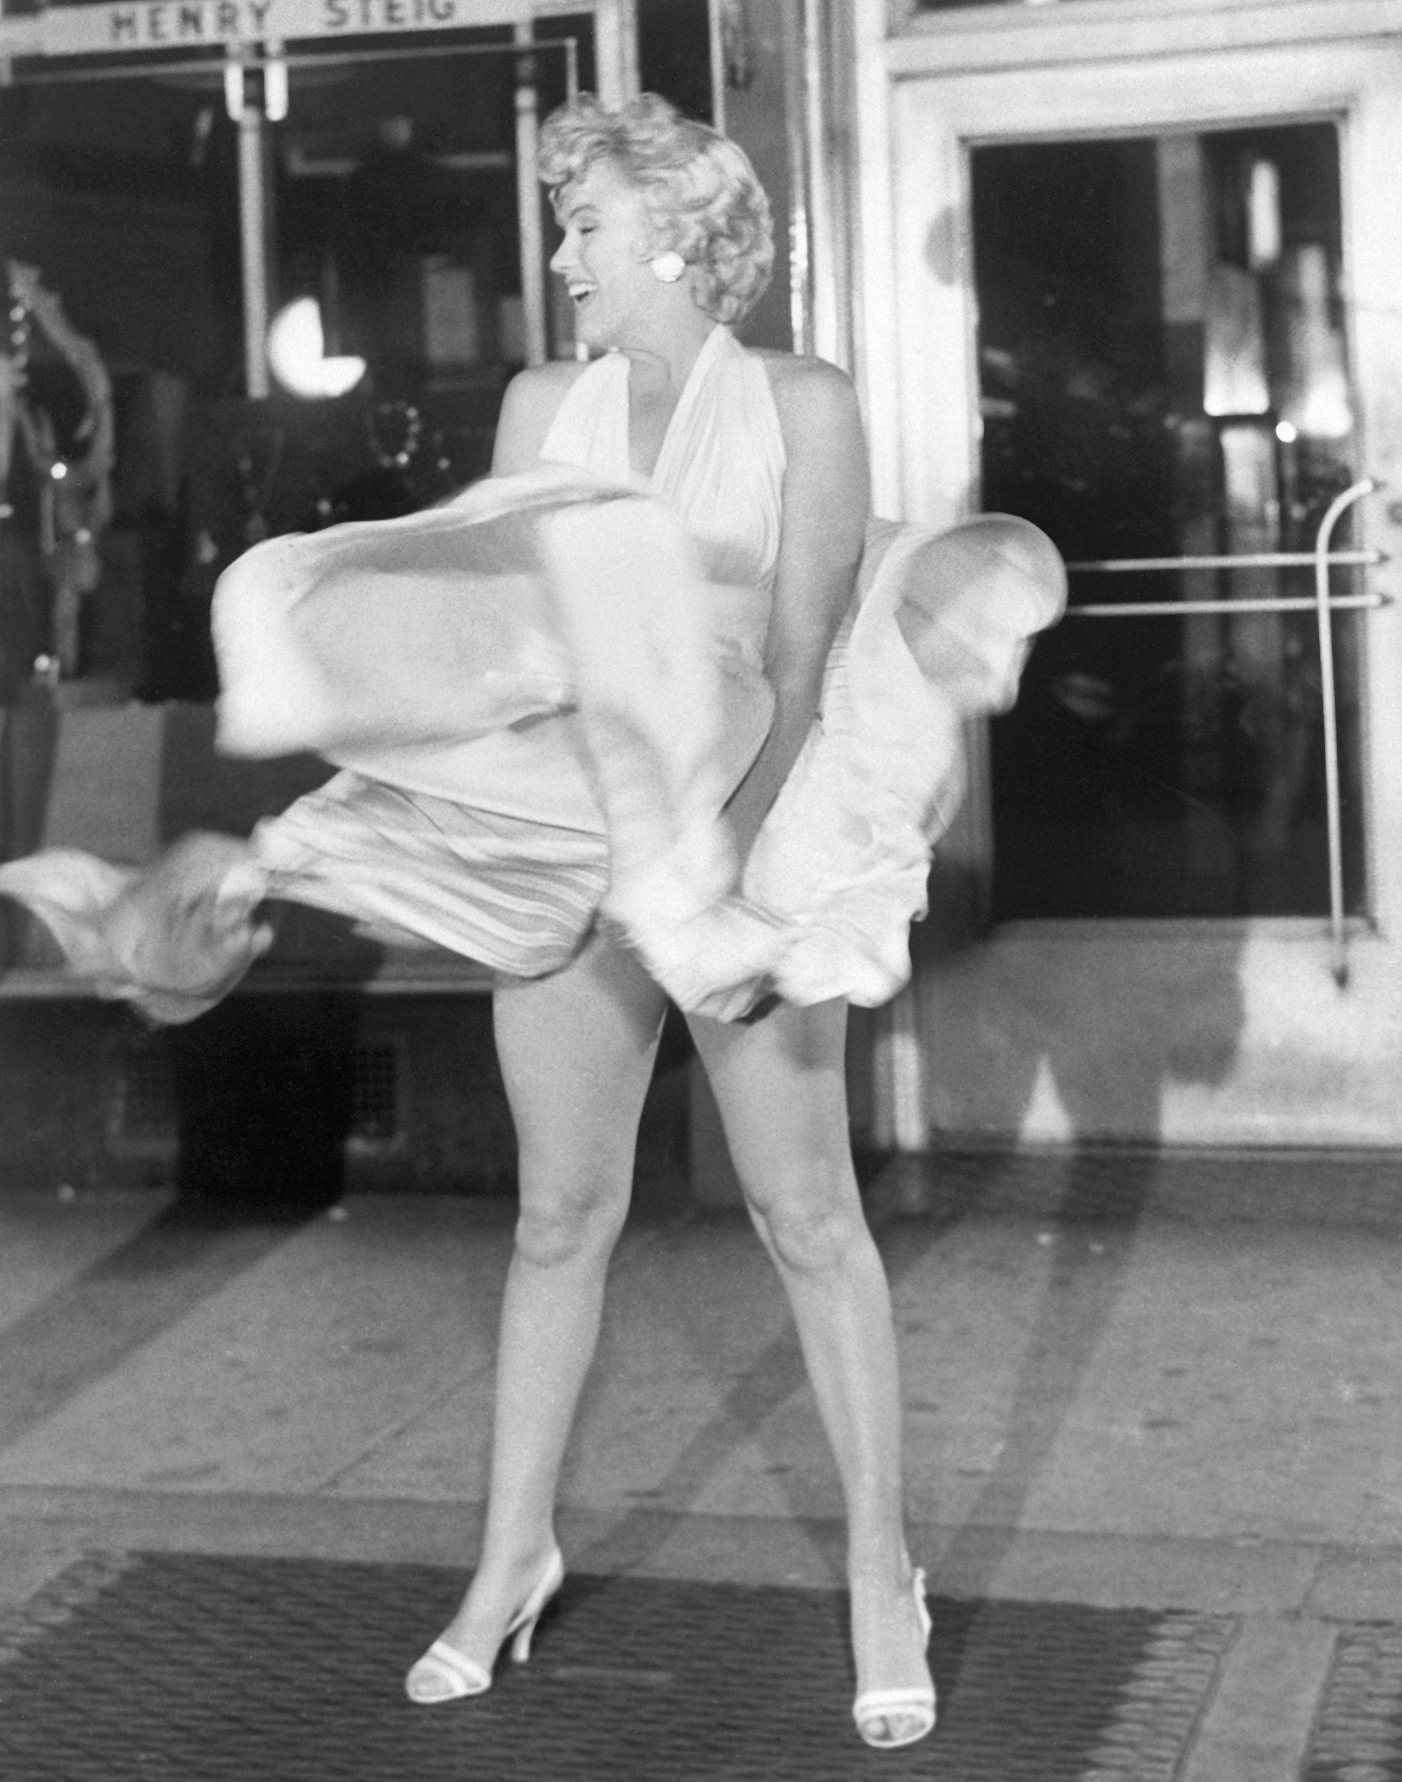 Marilyn Monroe during the filming of "The Seven Year Itch" in Manhattan, New York in 1954. | Source: Getty Images